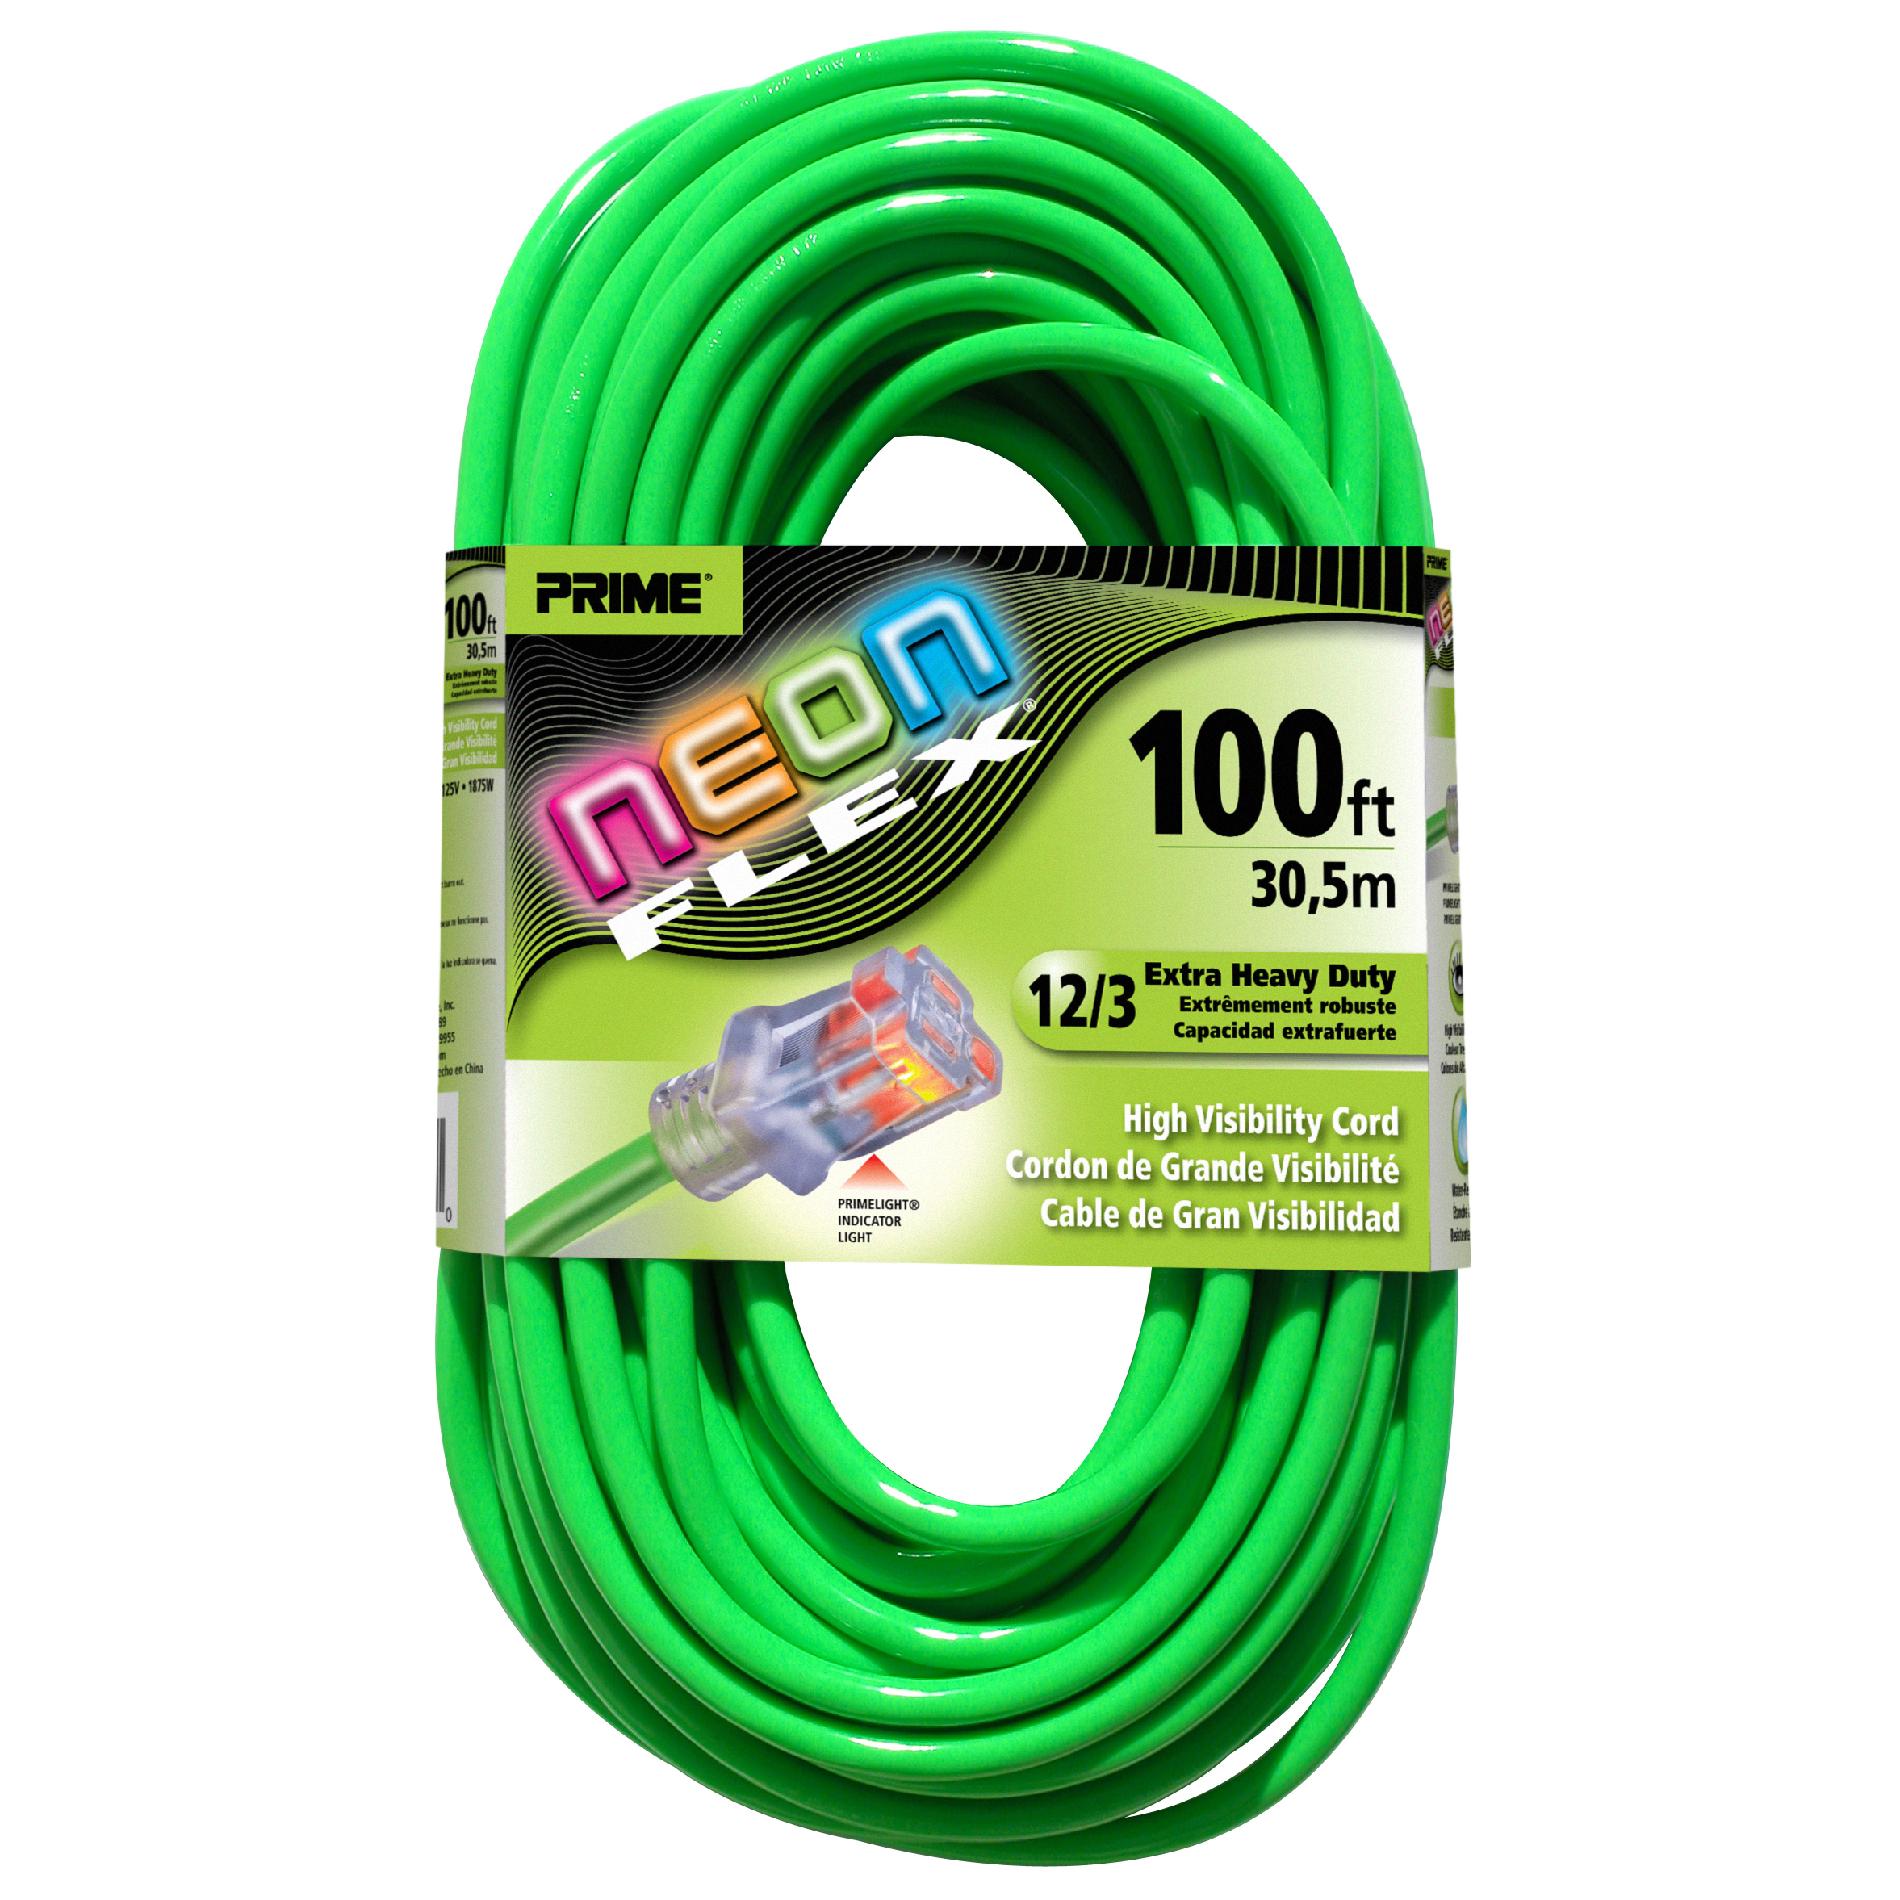 NS512835 100-Foot Neon Flex Outdoor Extension Cord With Indicator Light